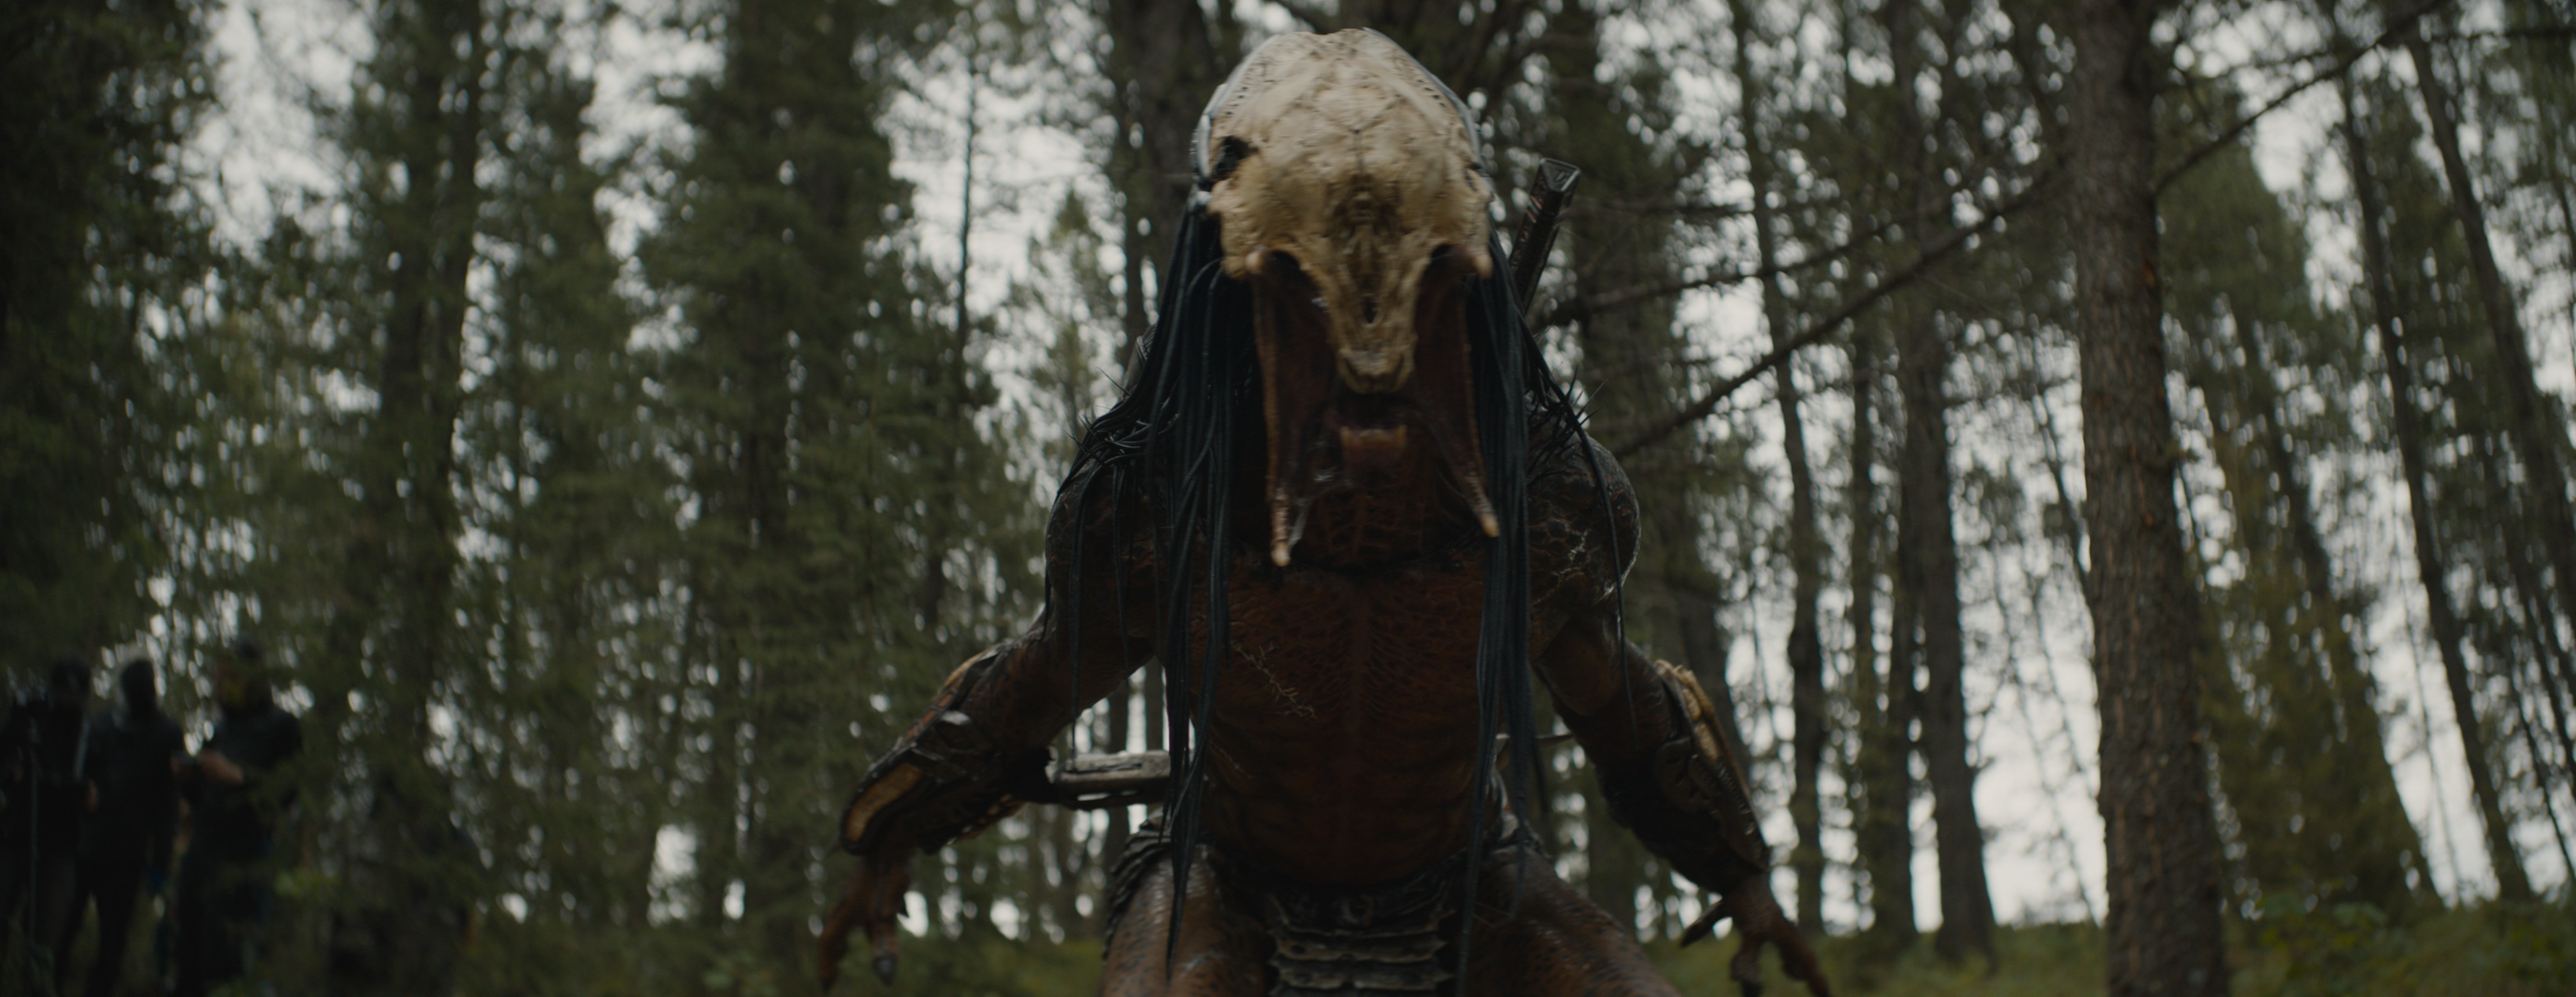 A camera shot of the Predator in a scene from Prey, before visual effects are applied.